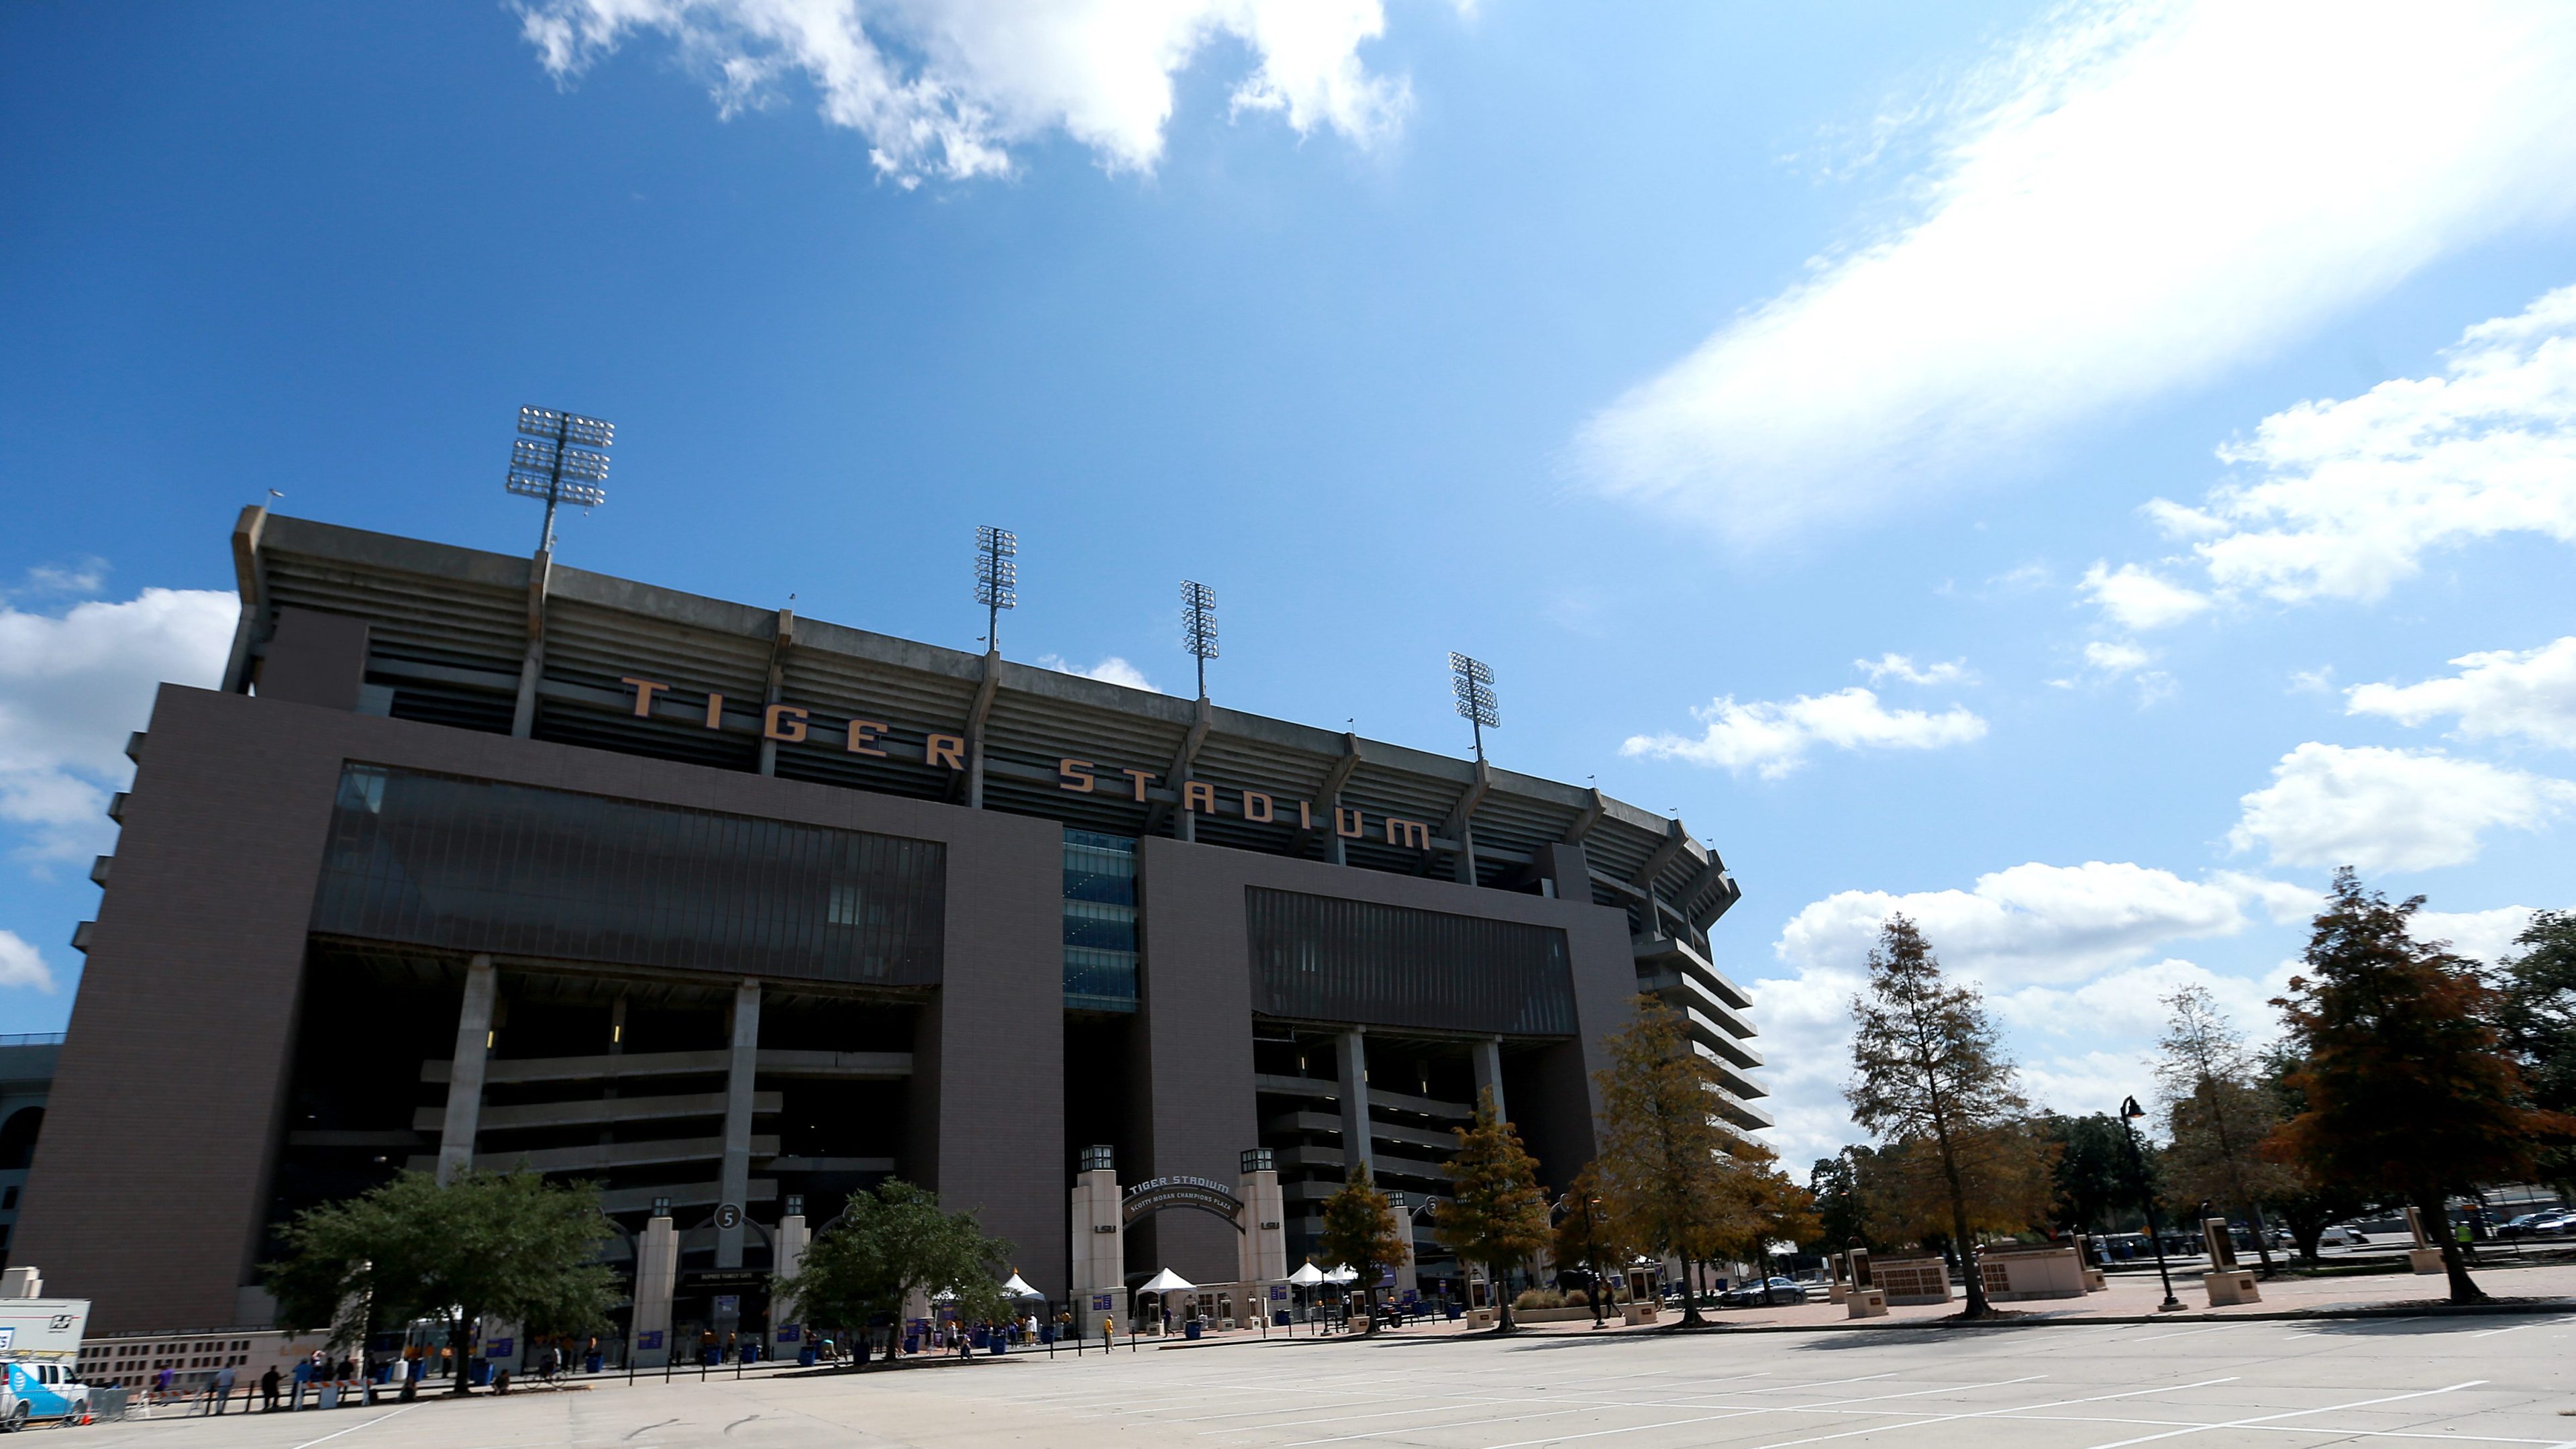 A general view of the exterior of Tiger Stadium.